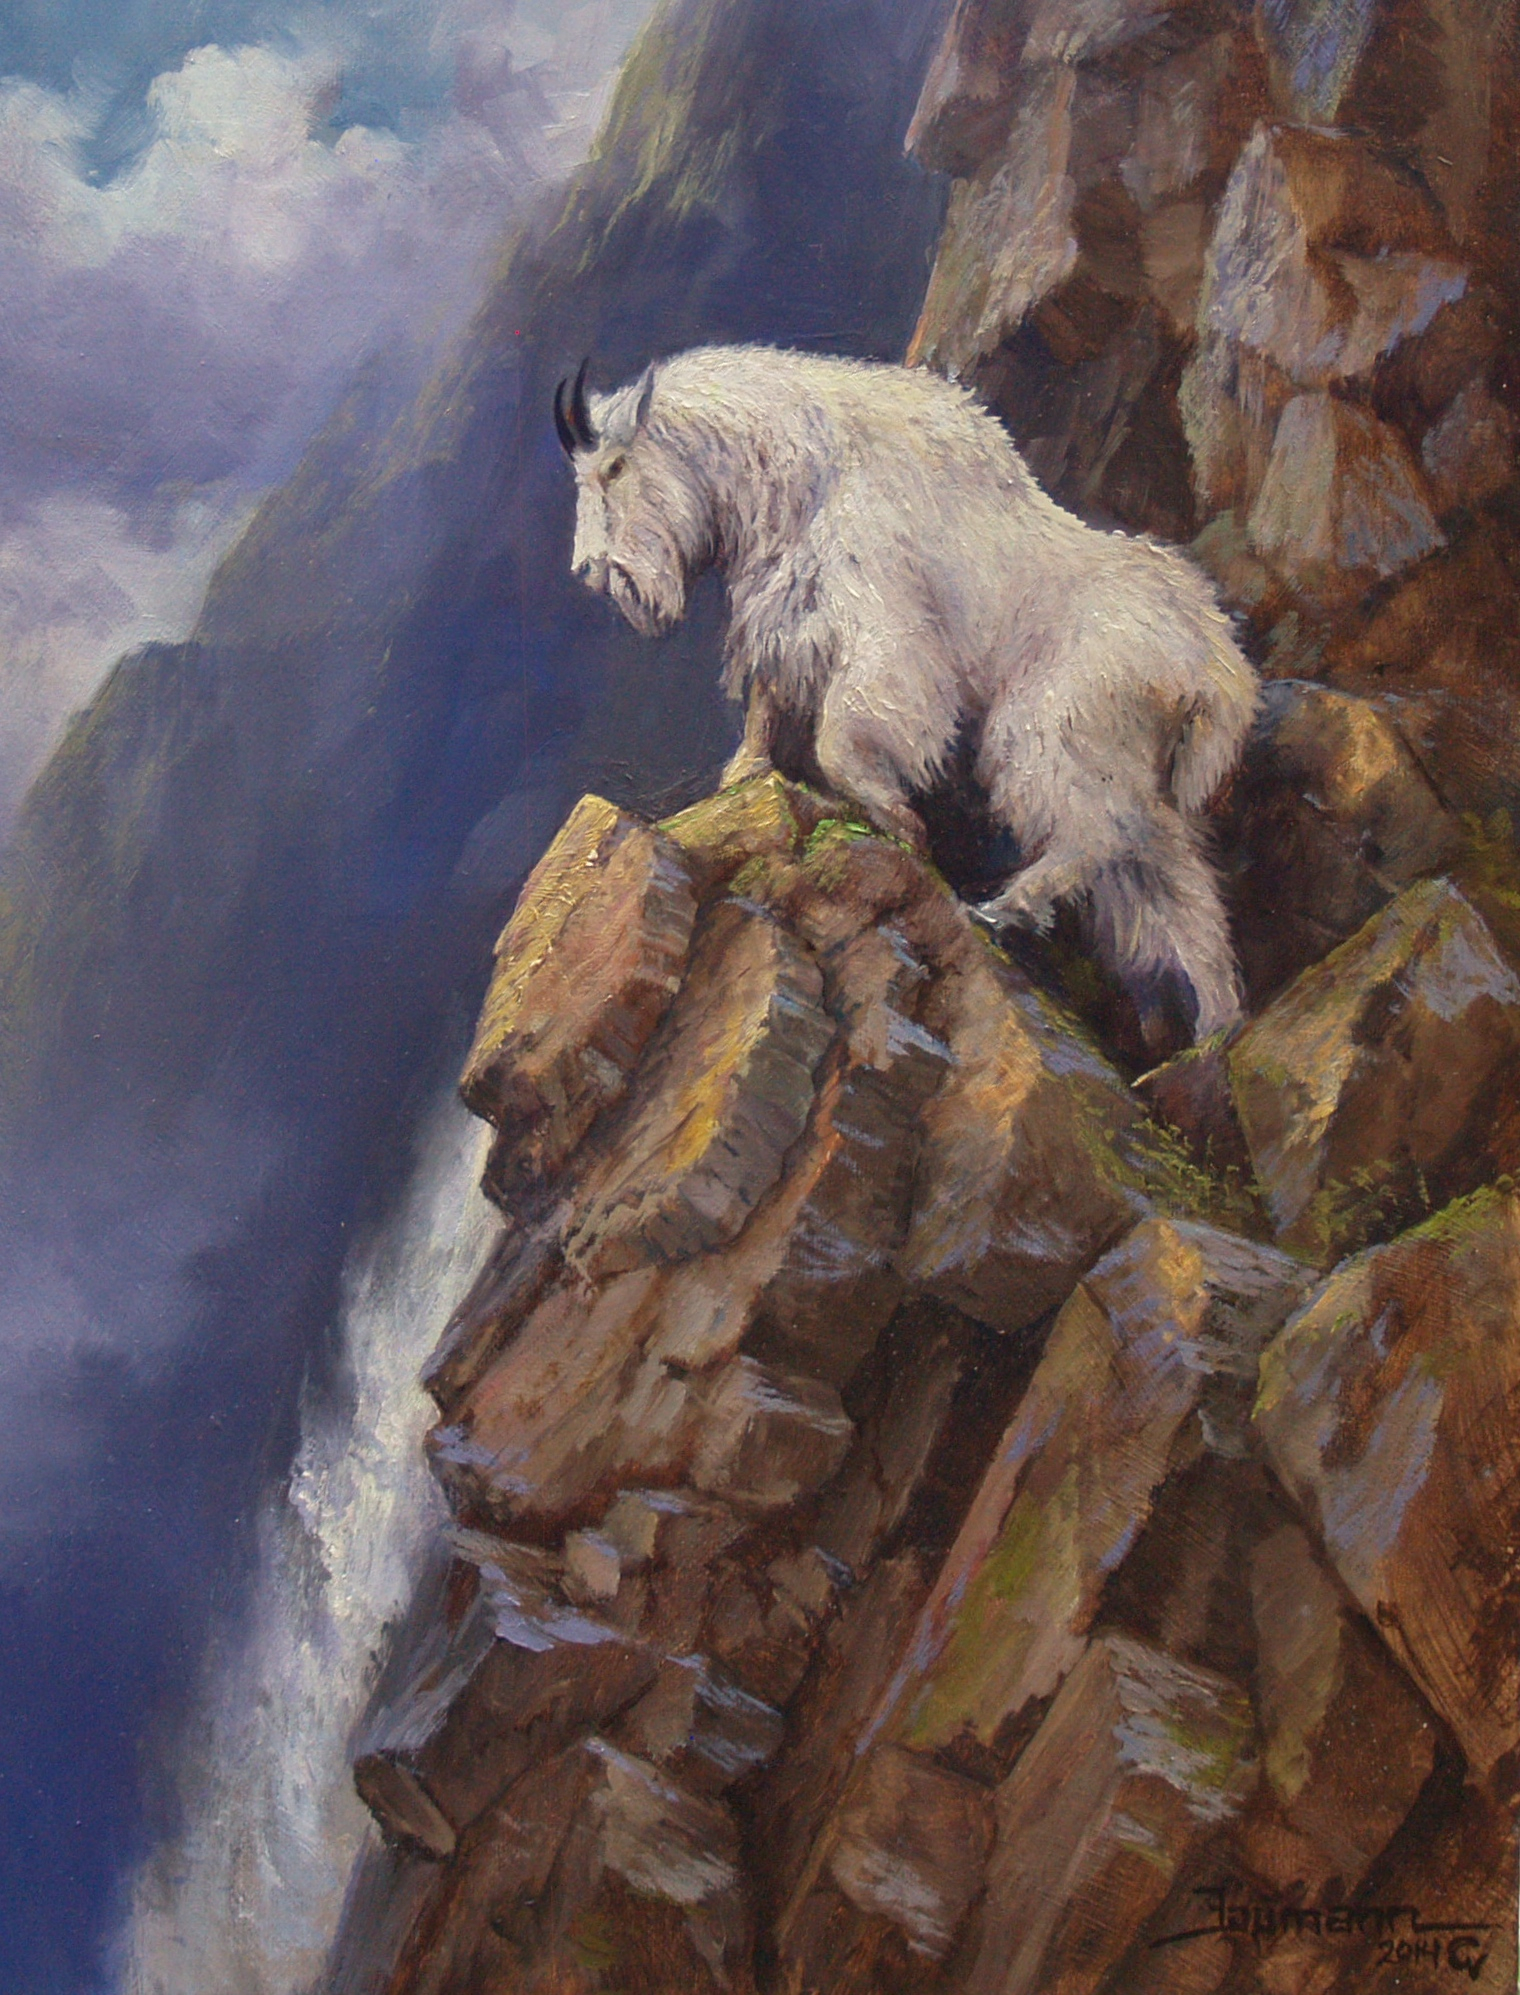 This oil painting called Ascending Mountain Goat by Stefan Baumann shows a white Mountain Goat standing on a cliff high in Glacier National Park.